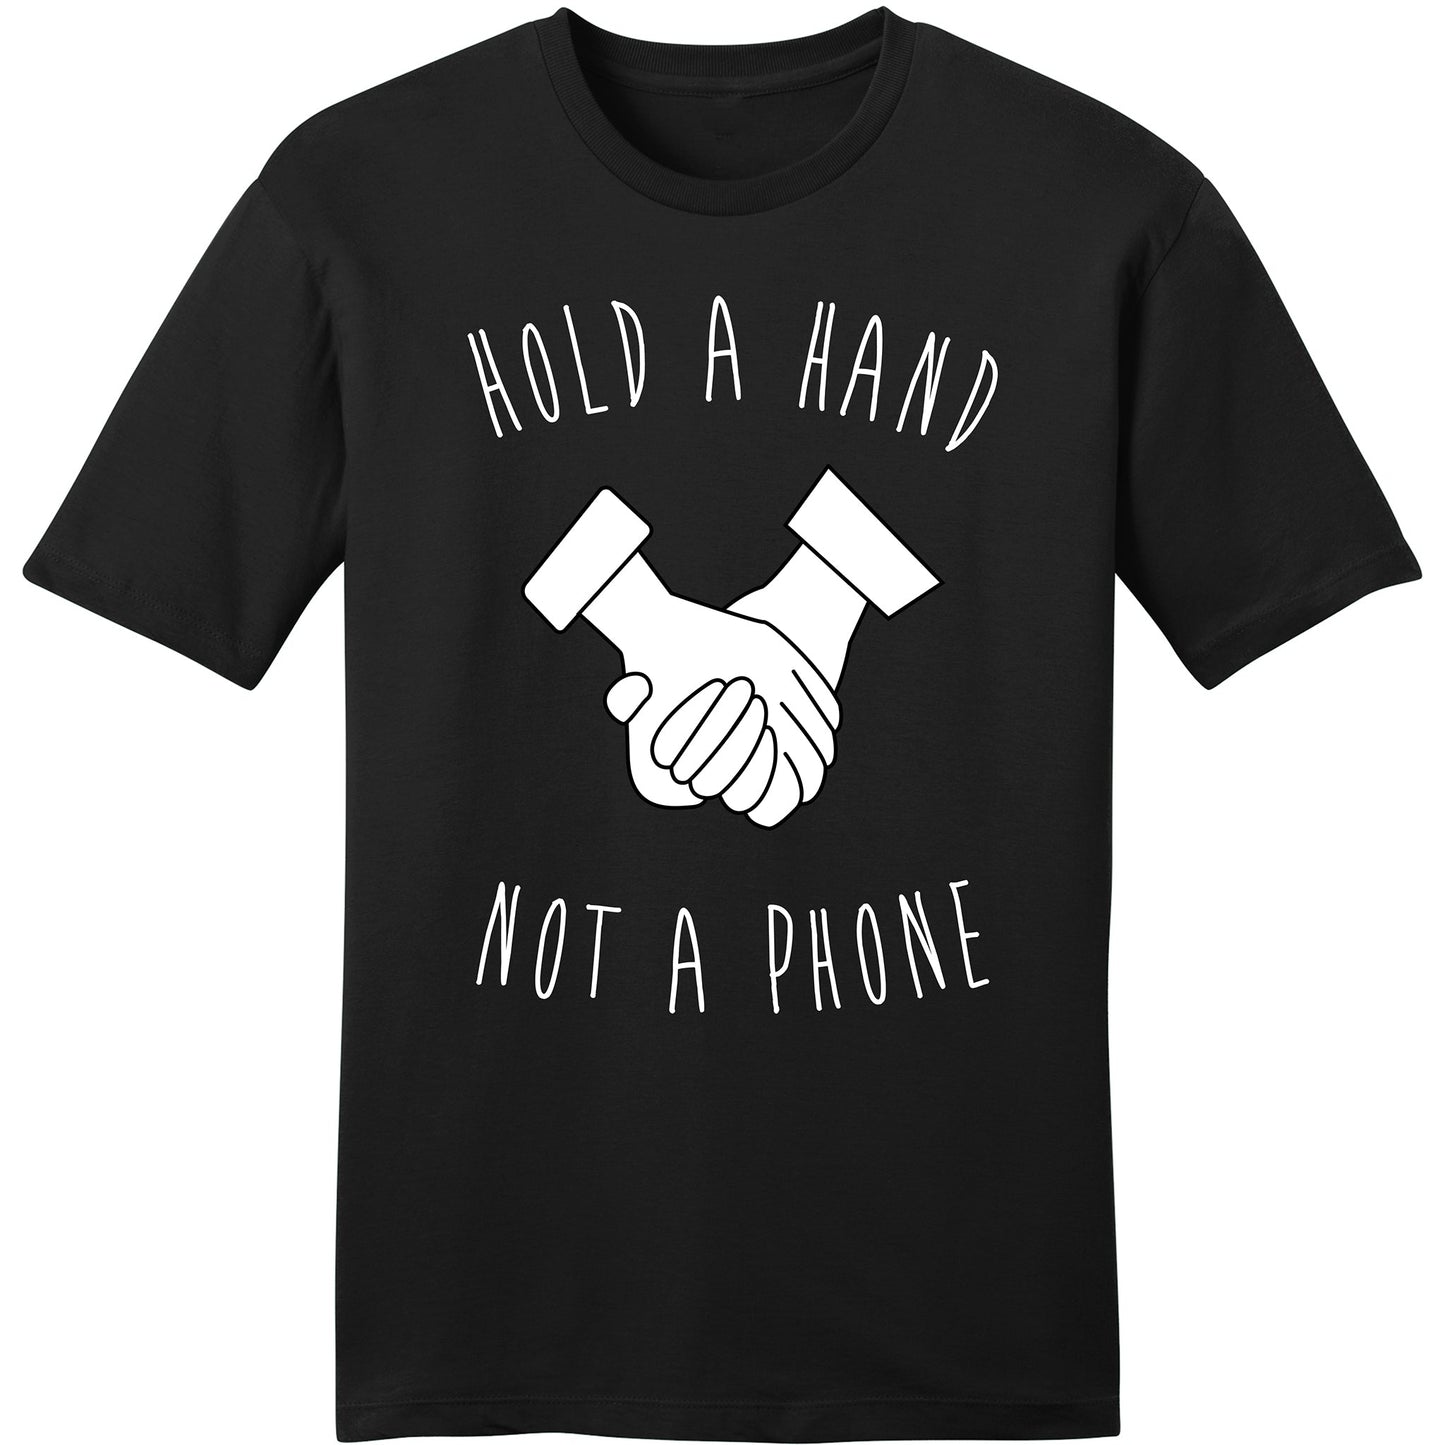 Hold a Hand, Not a phone - Thumb United